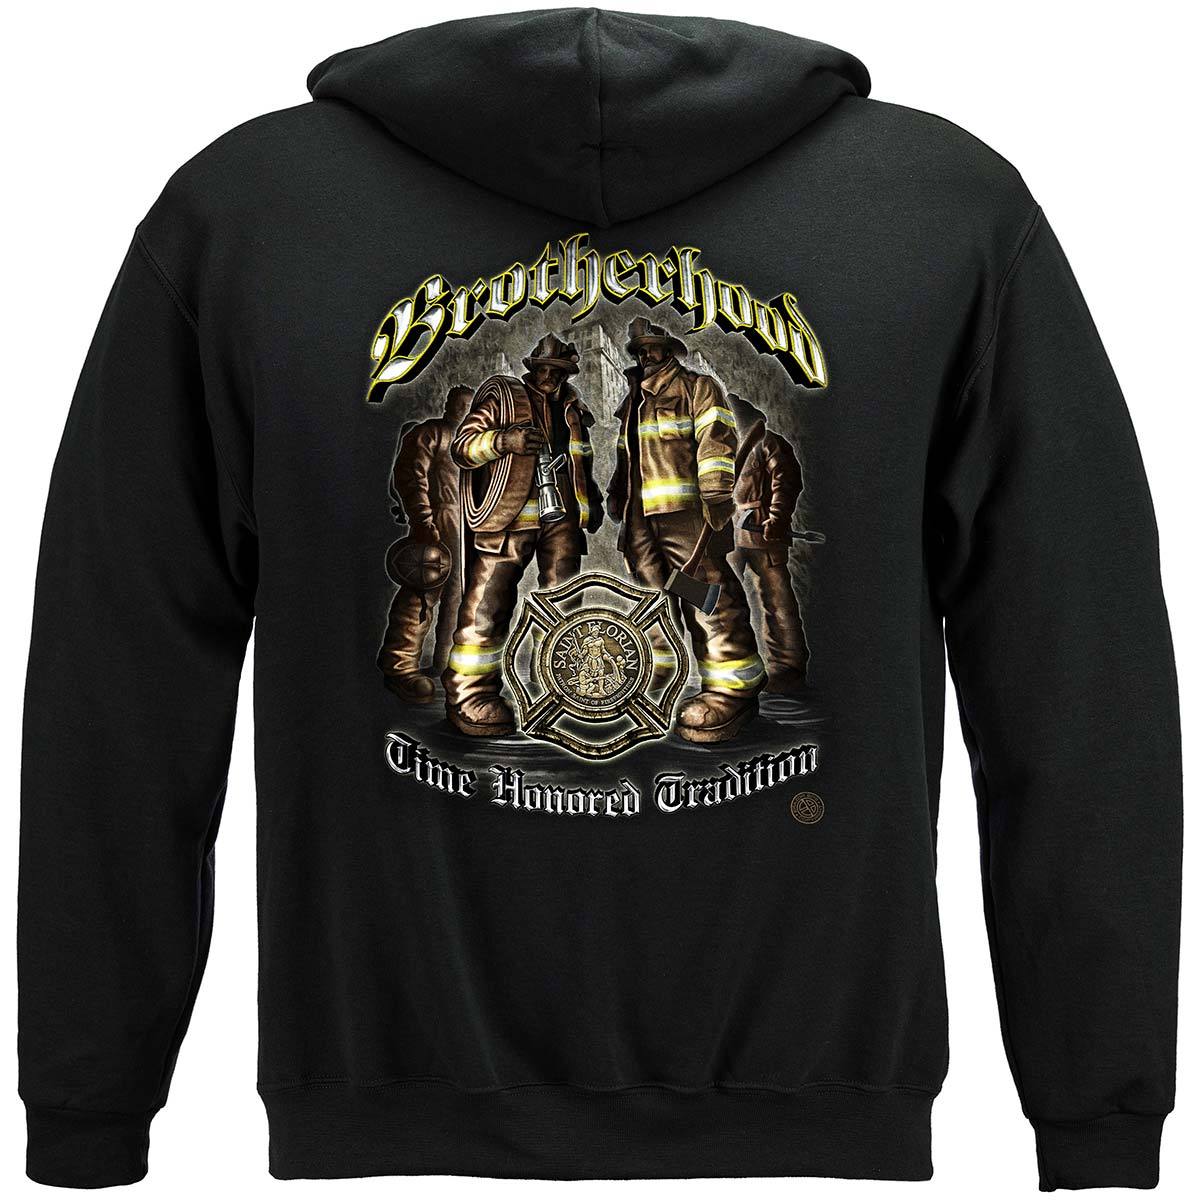 Firefighter Time Honor Tradition Premium Hooded Sweat Shirt